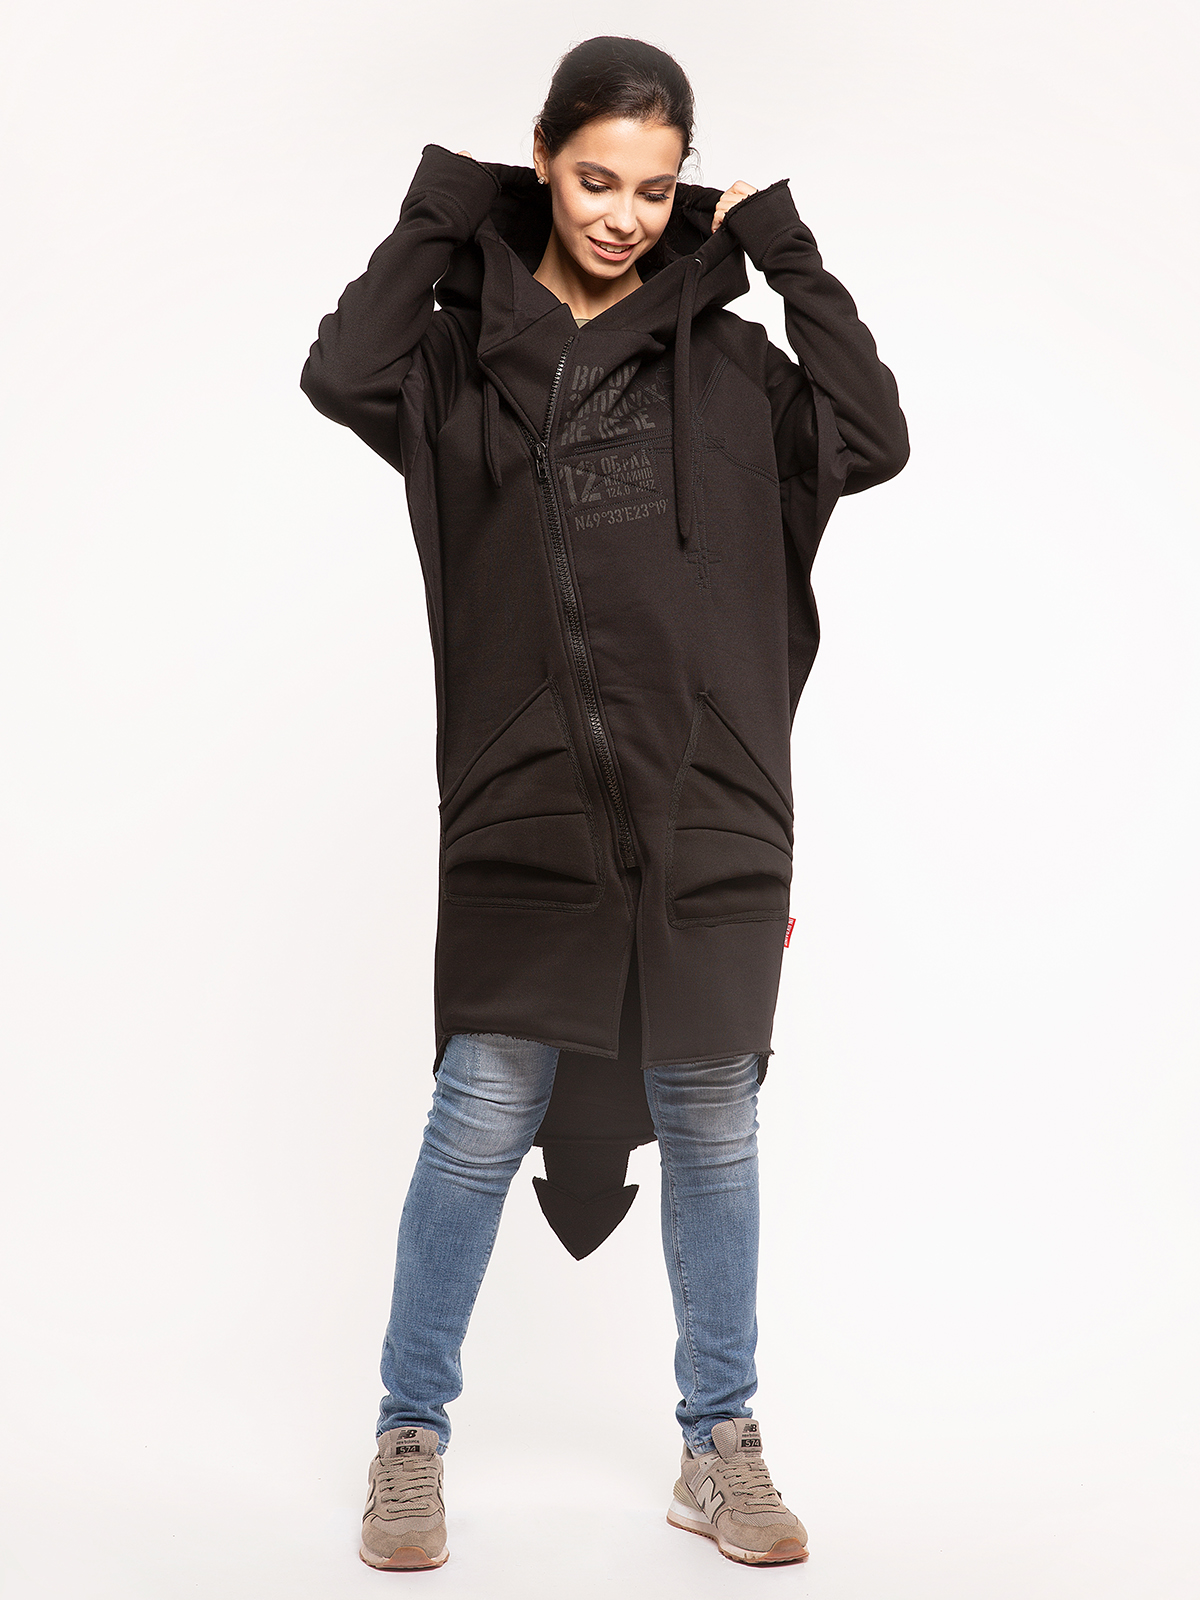 Women's Hoodie Dragon. Color black. 
Size worn by the model: XS.